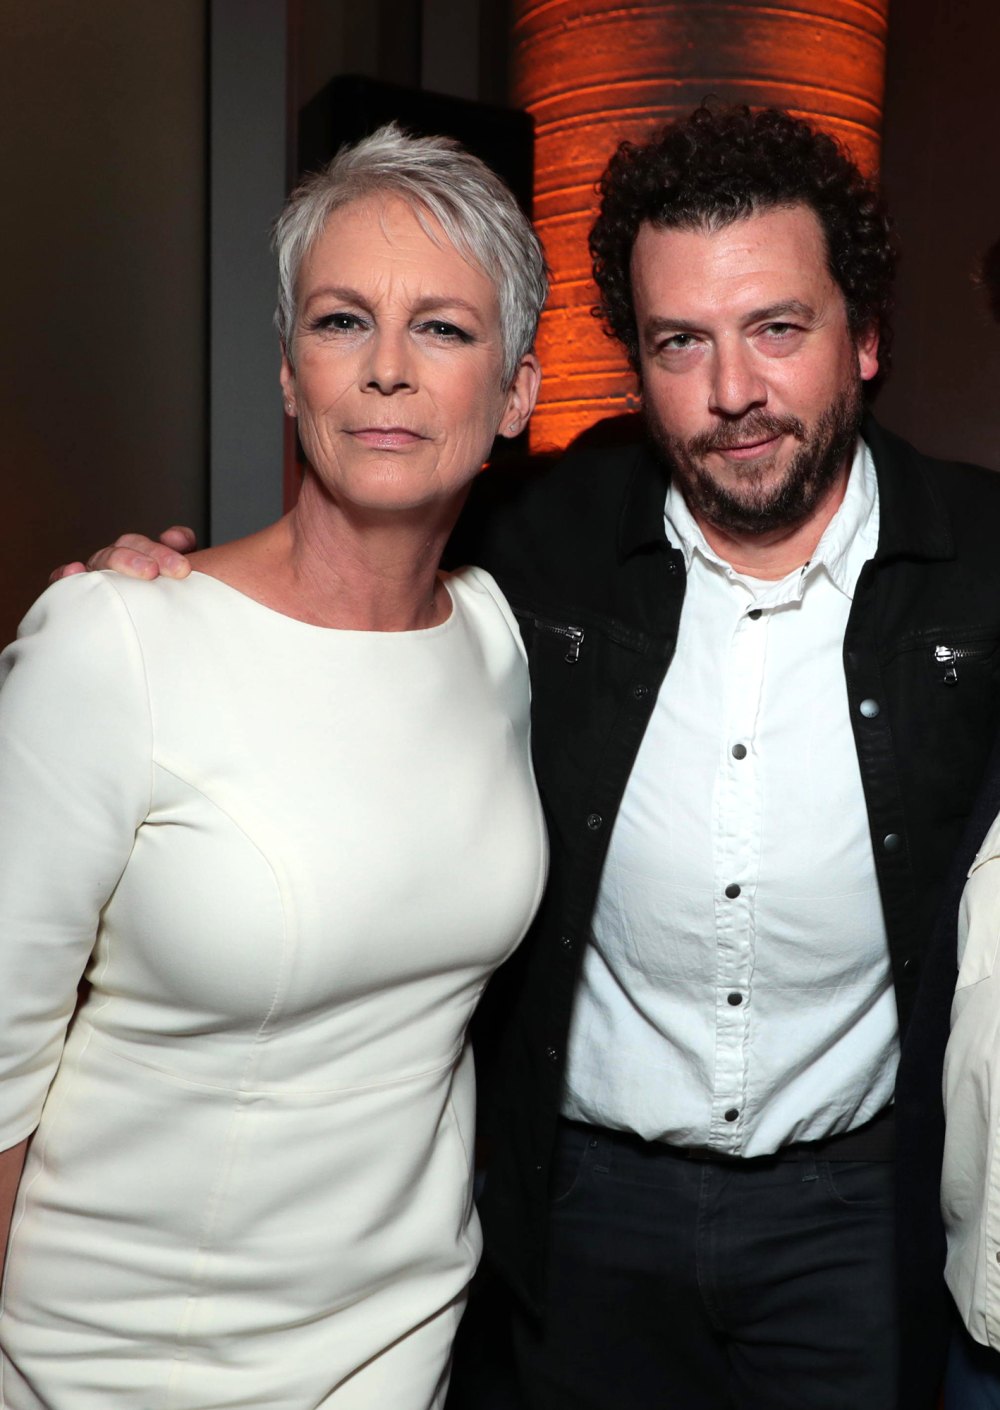 Danny McBride Reacts to 'Halloween Ends' Critics Wanting More Michael Myers